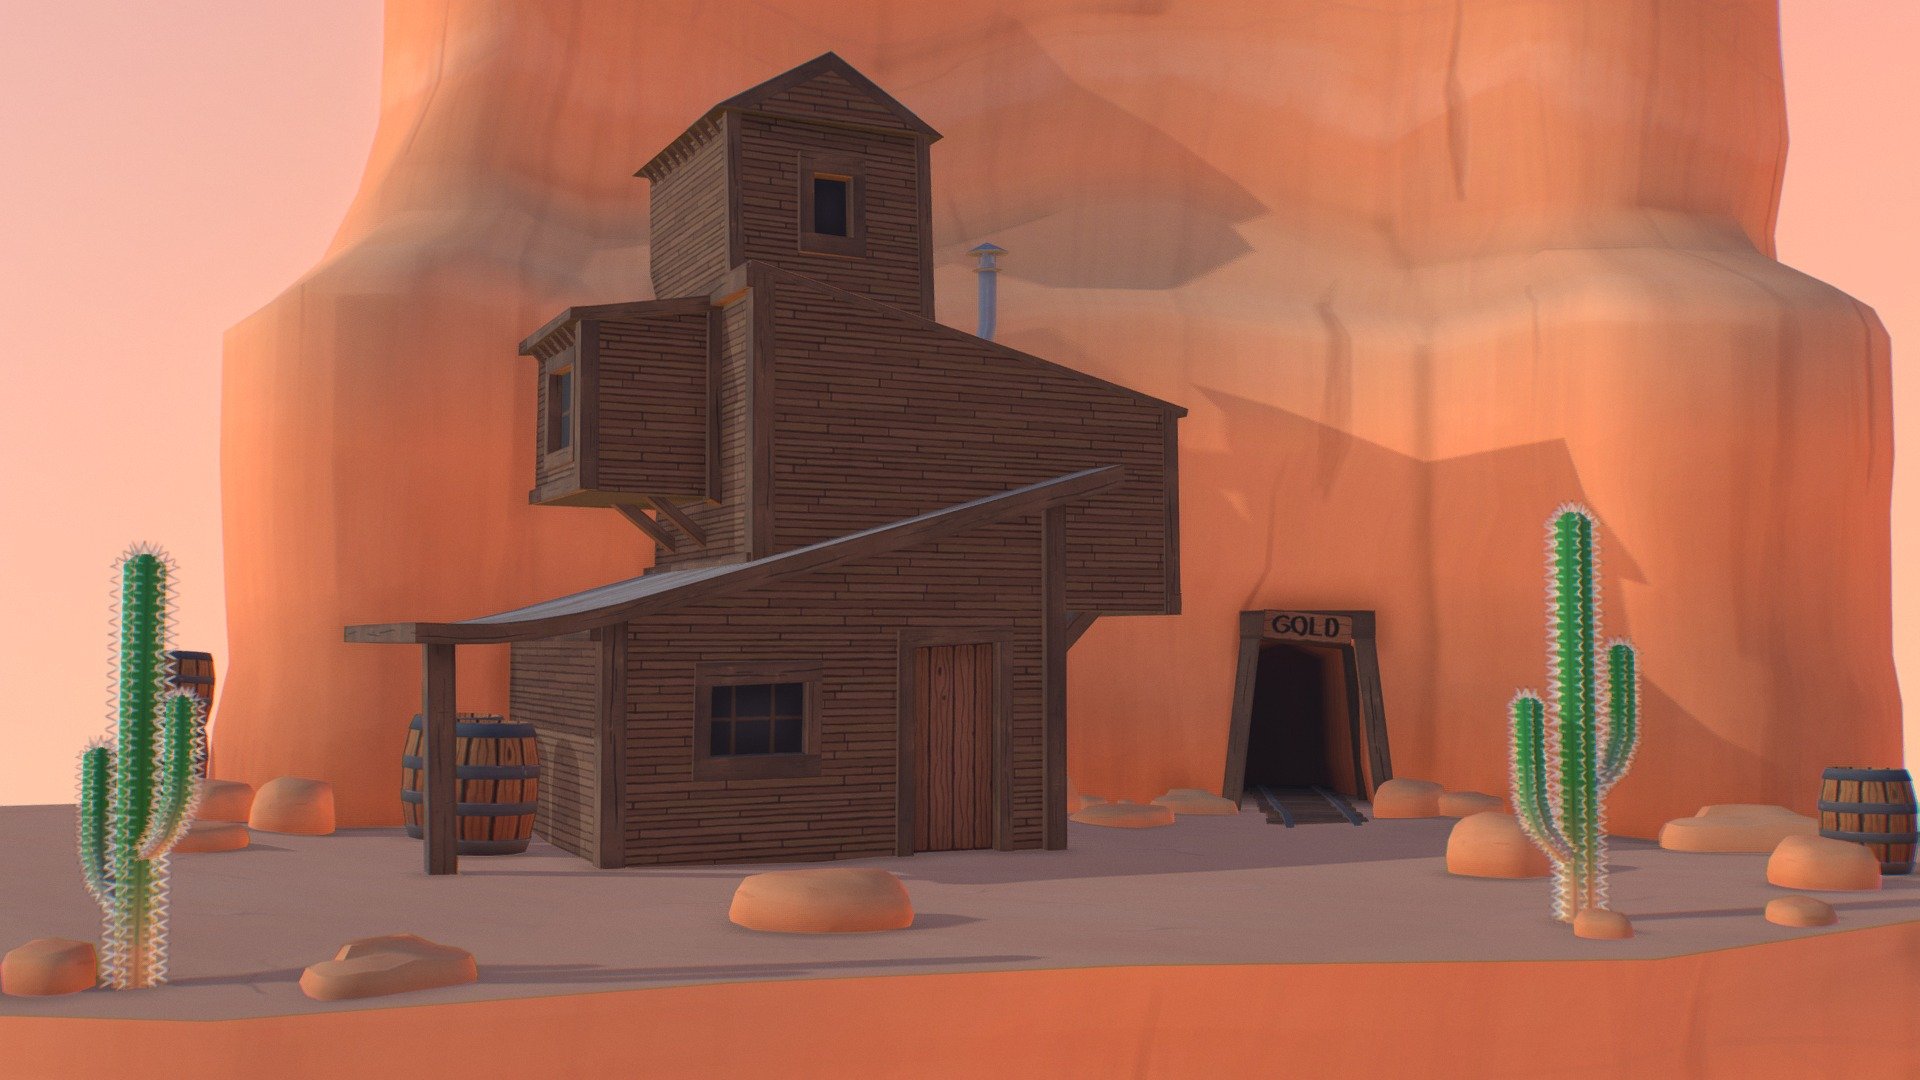 A low poly hand painted scene for gameart 2017. The house of a gold miner next to his mine, in the middle of the desert. I will probably upload a more finished version somewhere in the future 3d model